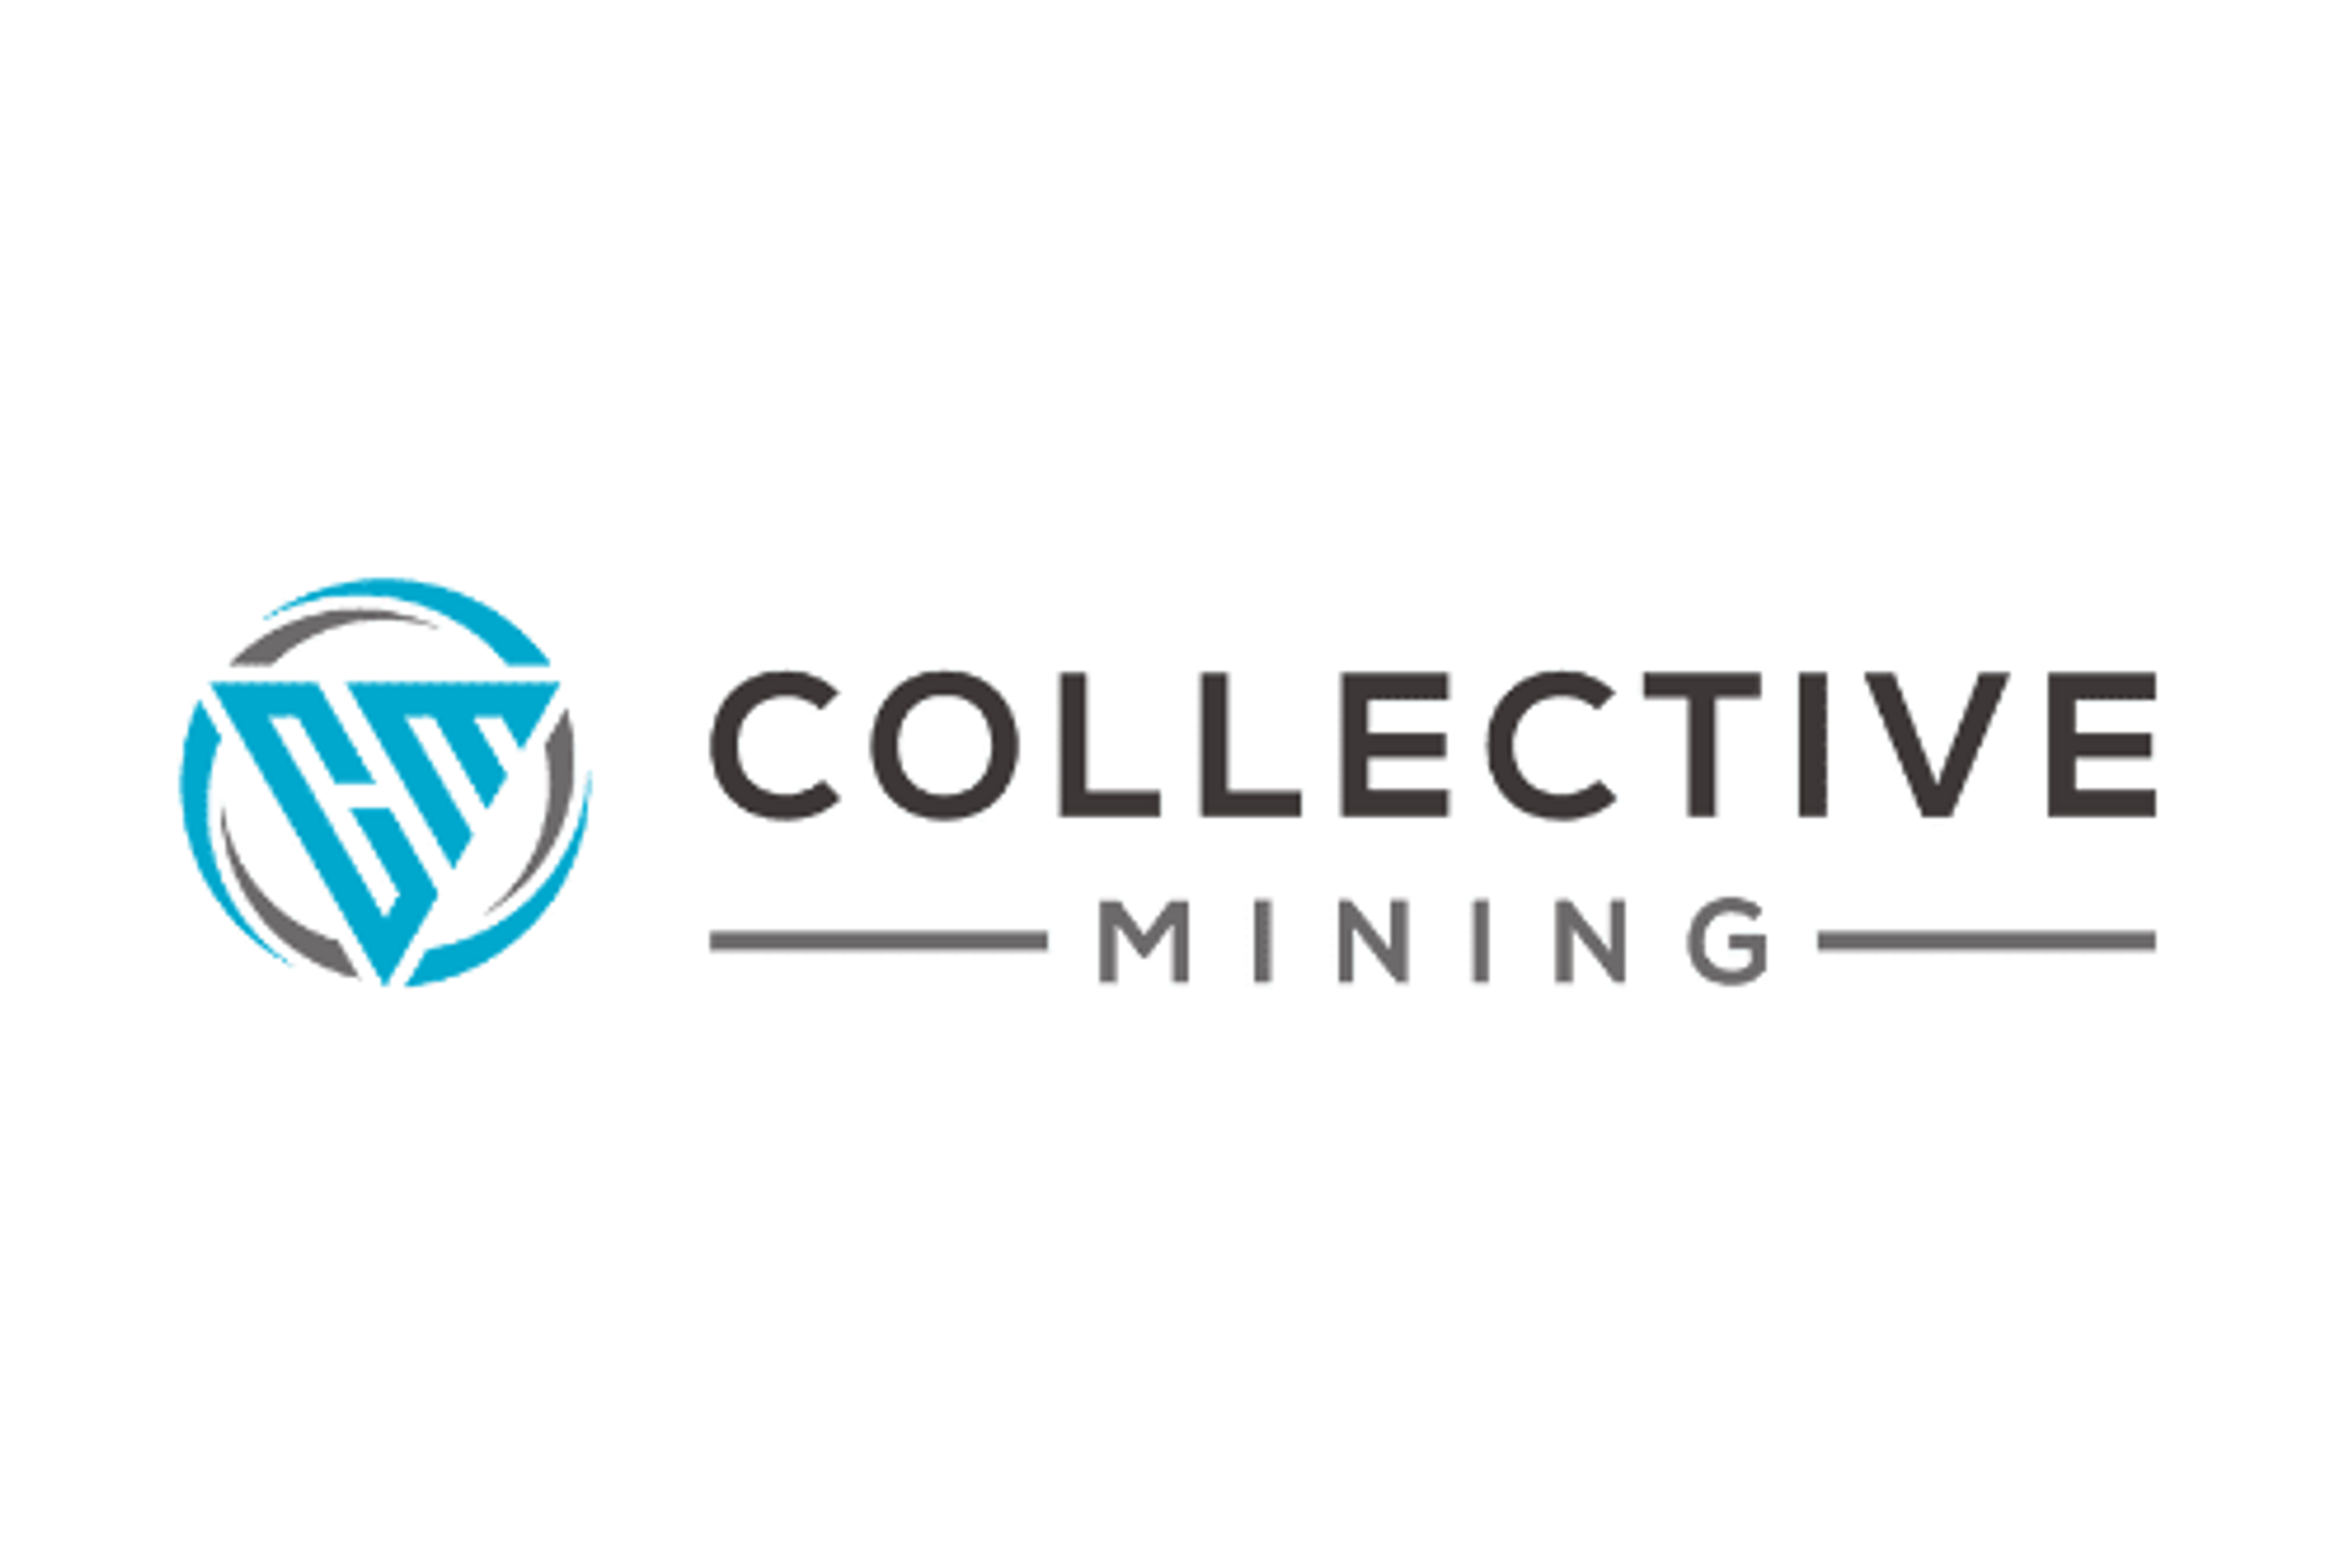 Collective Mining Intercepts a Broad Zone of Mineralization in its Maiden Diamond Drill Hole at the Apollo Target with the Hole Still Advancing in Strong Mineralization